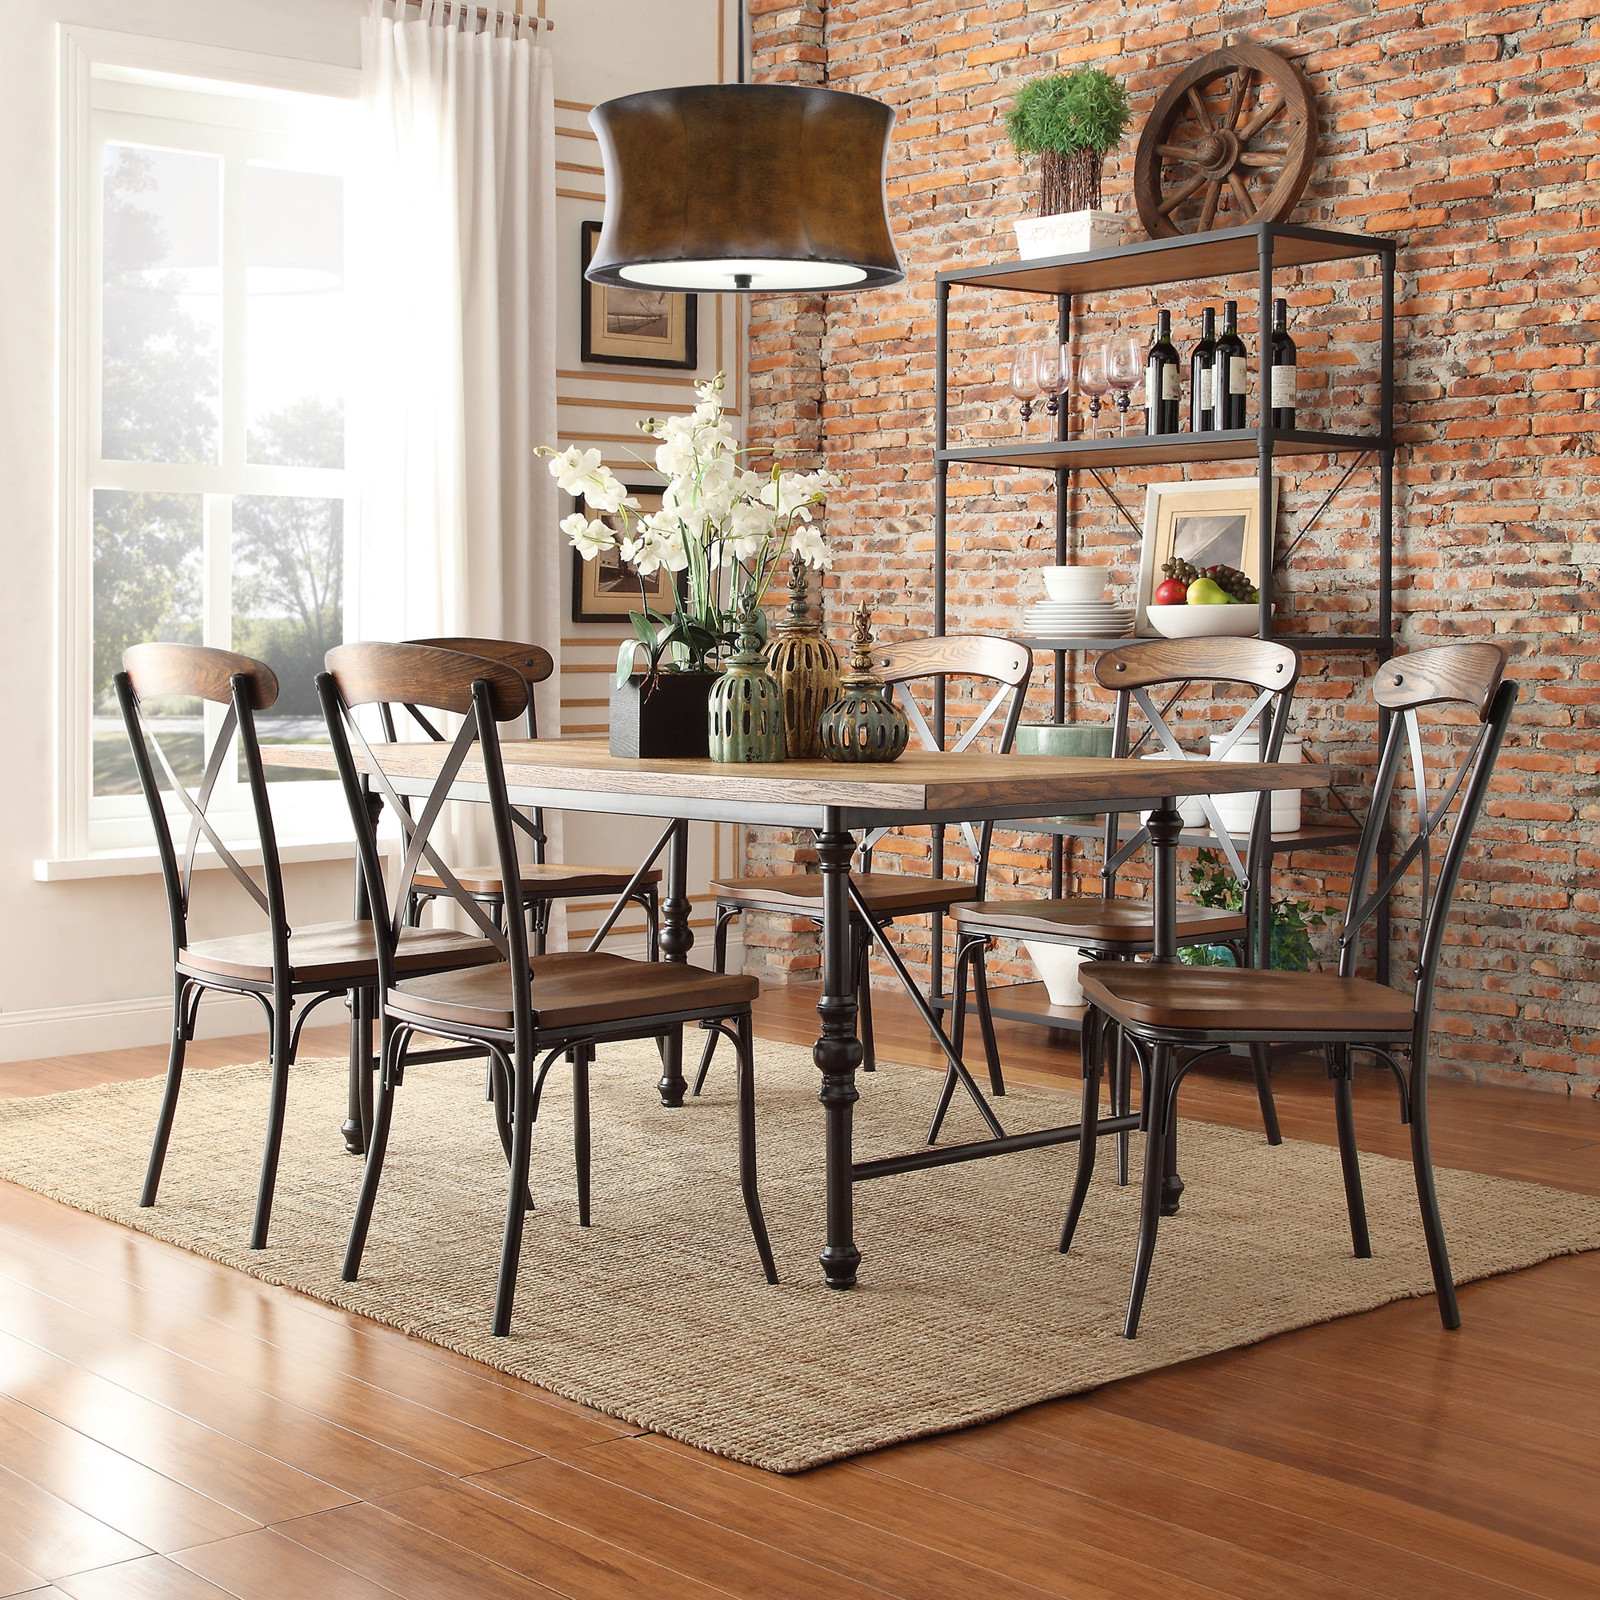 Rustic Kitchen Chairs
 Oxford Creek Allison Rustic 7 Piece Dining Set Home